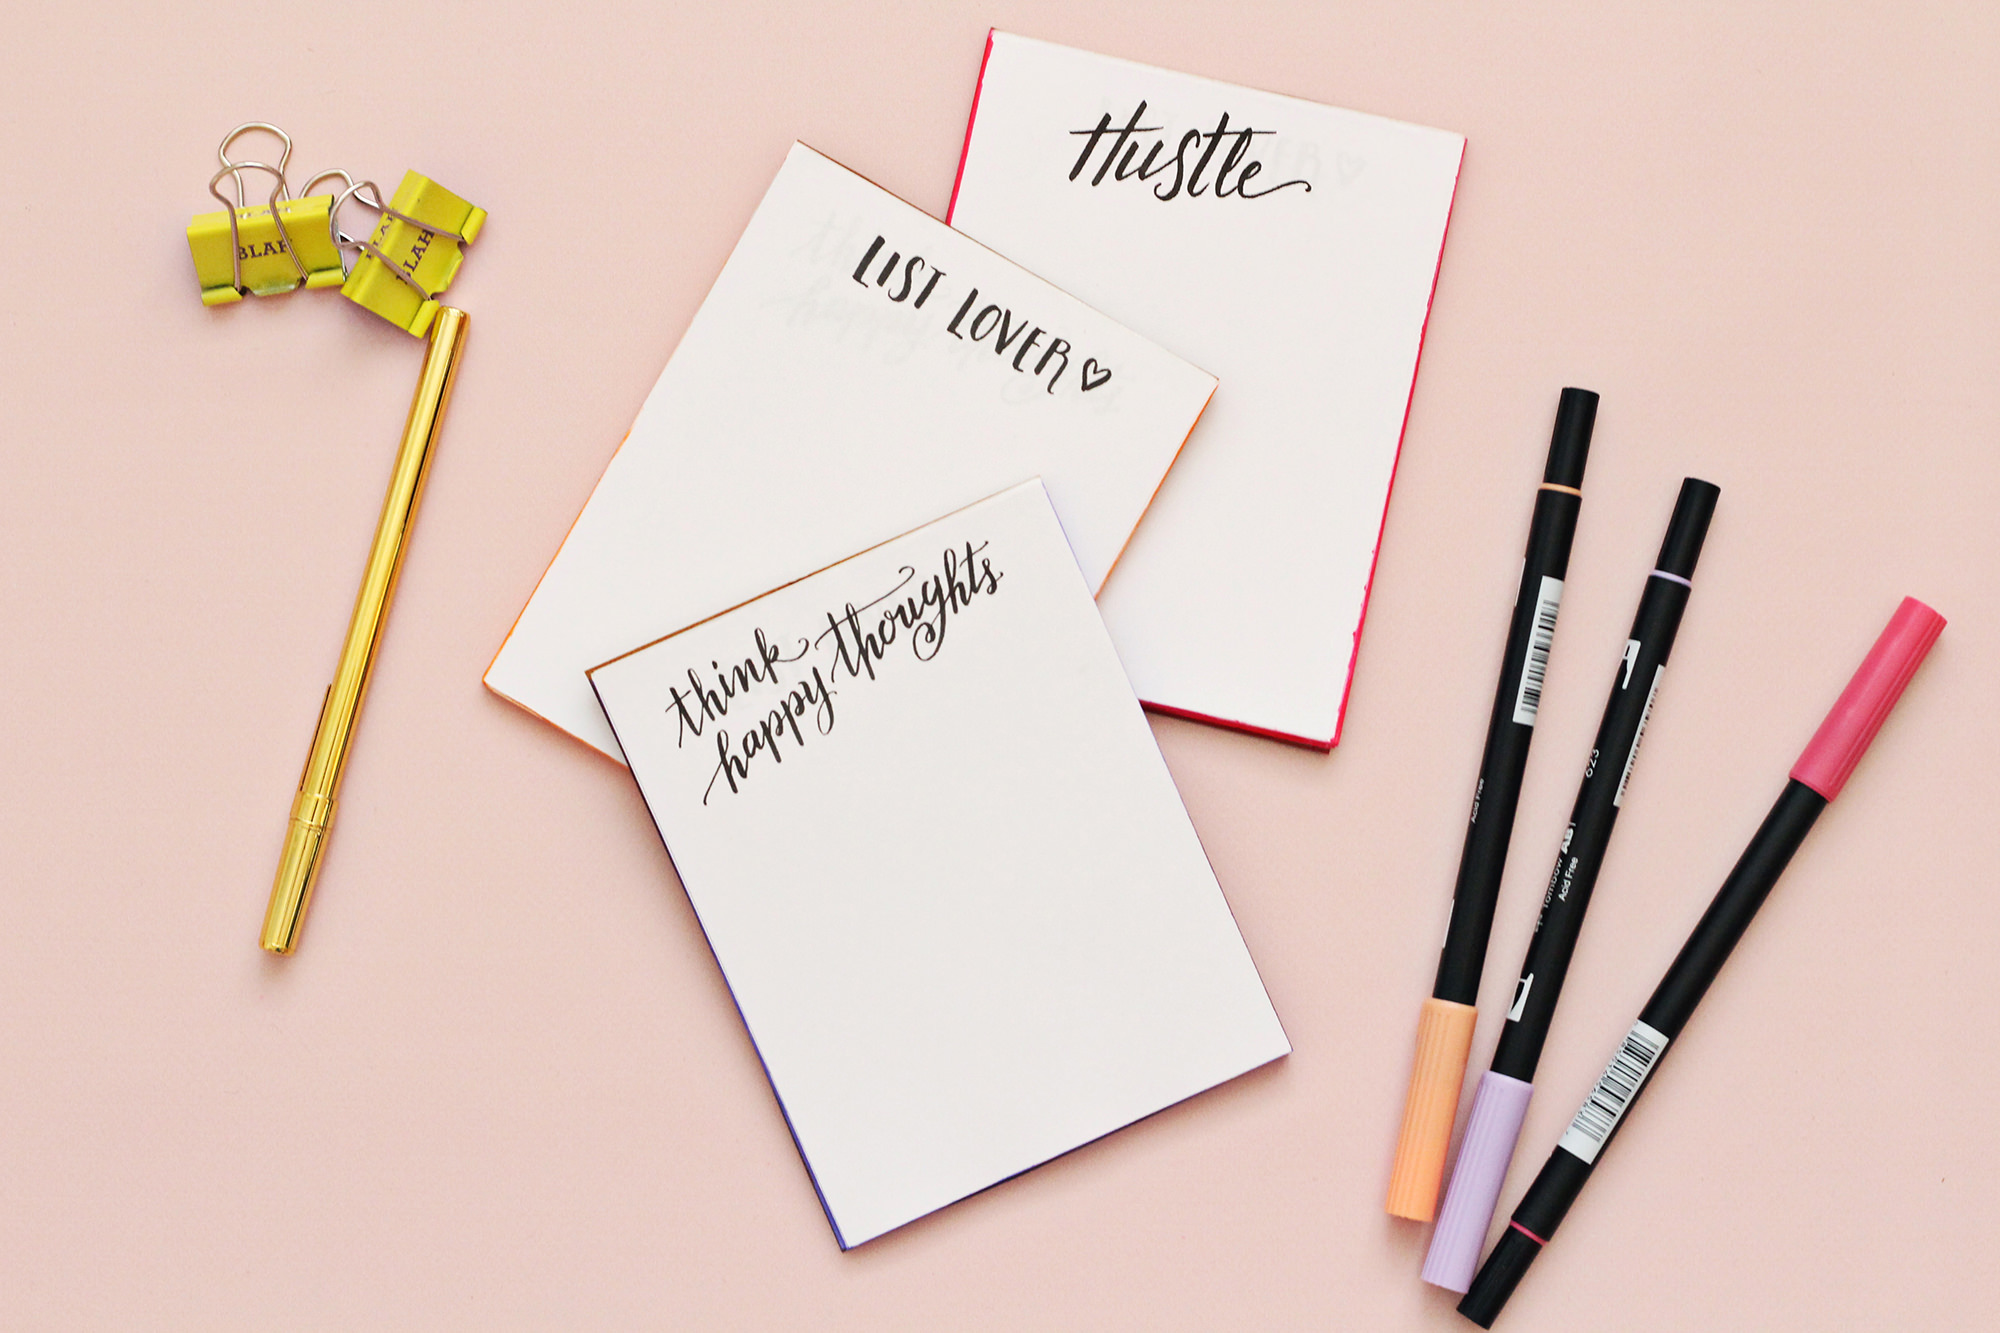 DIY notepads will give a bit of motivation on your desk to start the new year